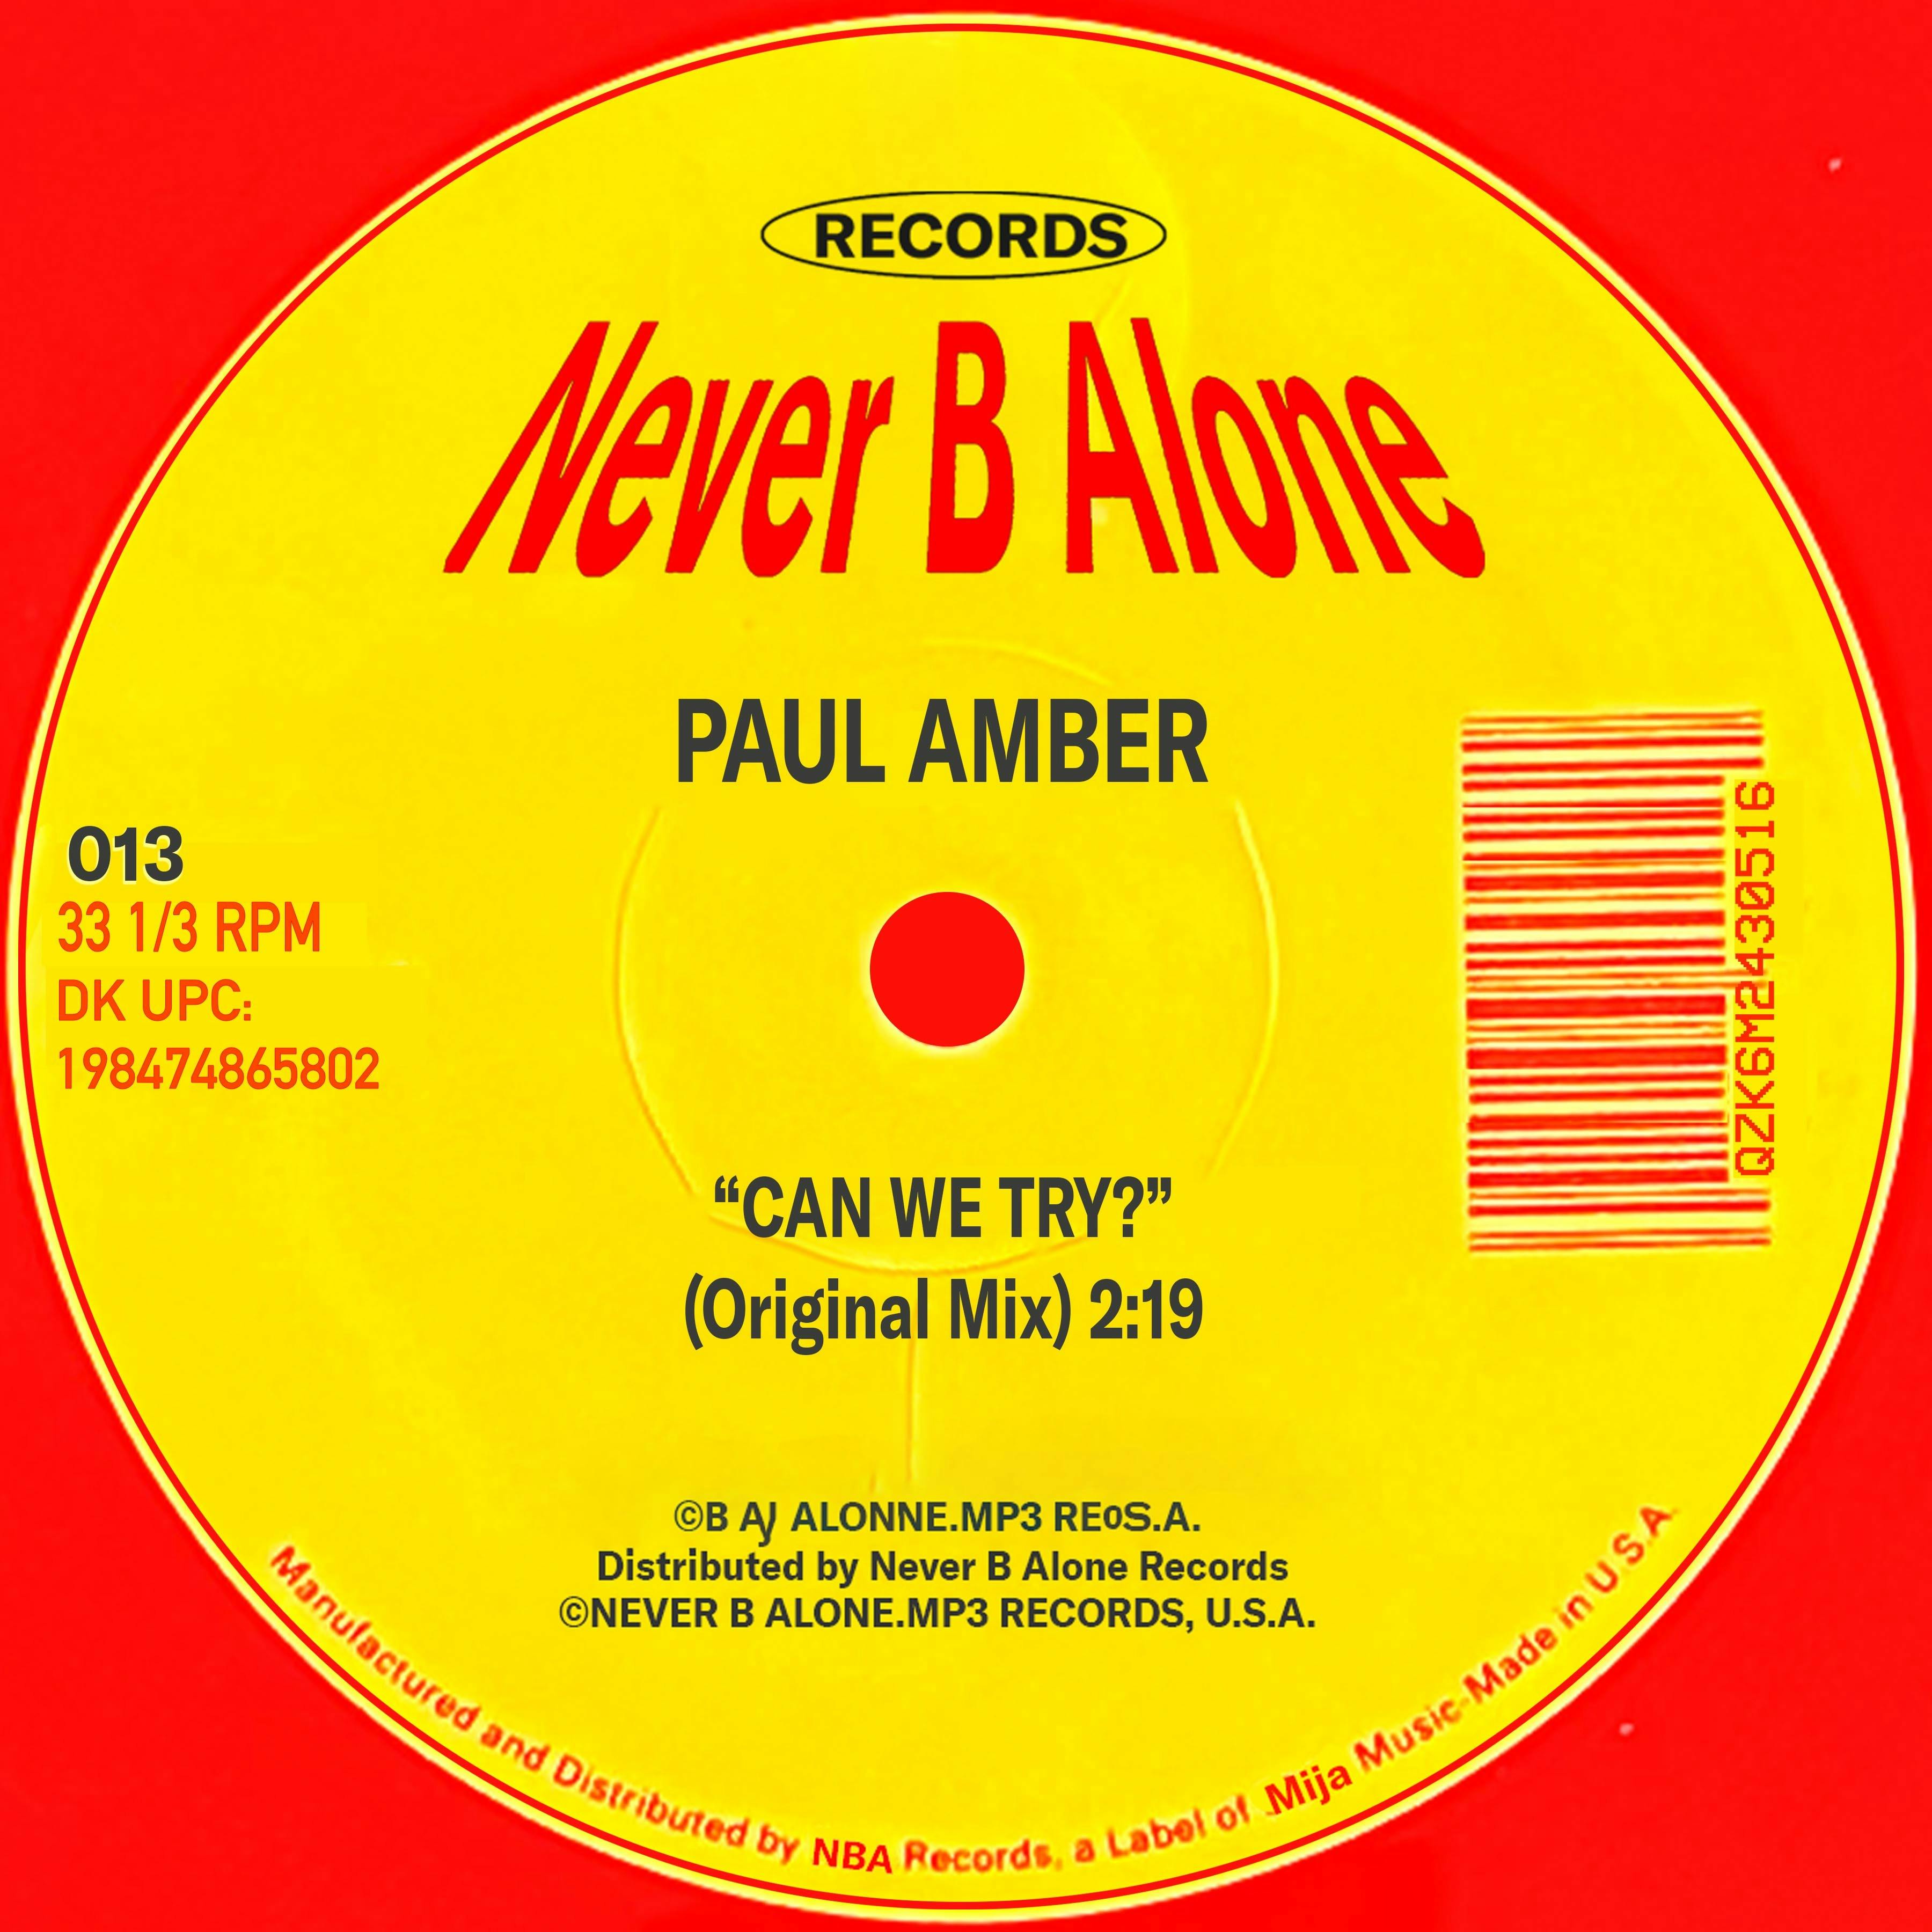 Paul Amber - "Can We Try?"